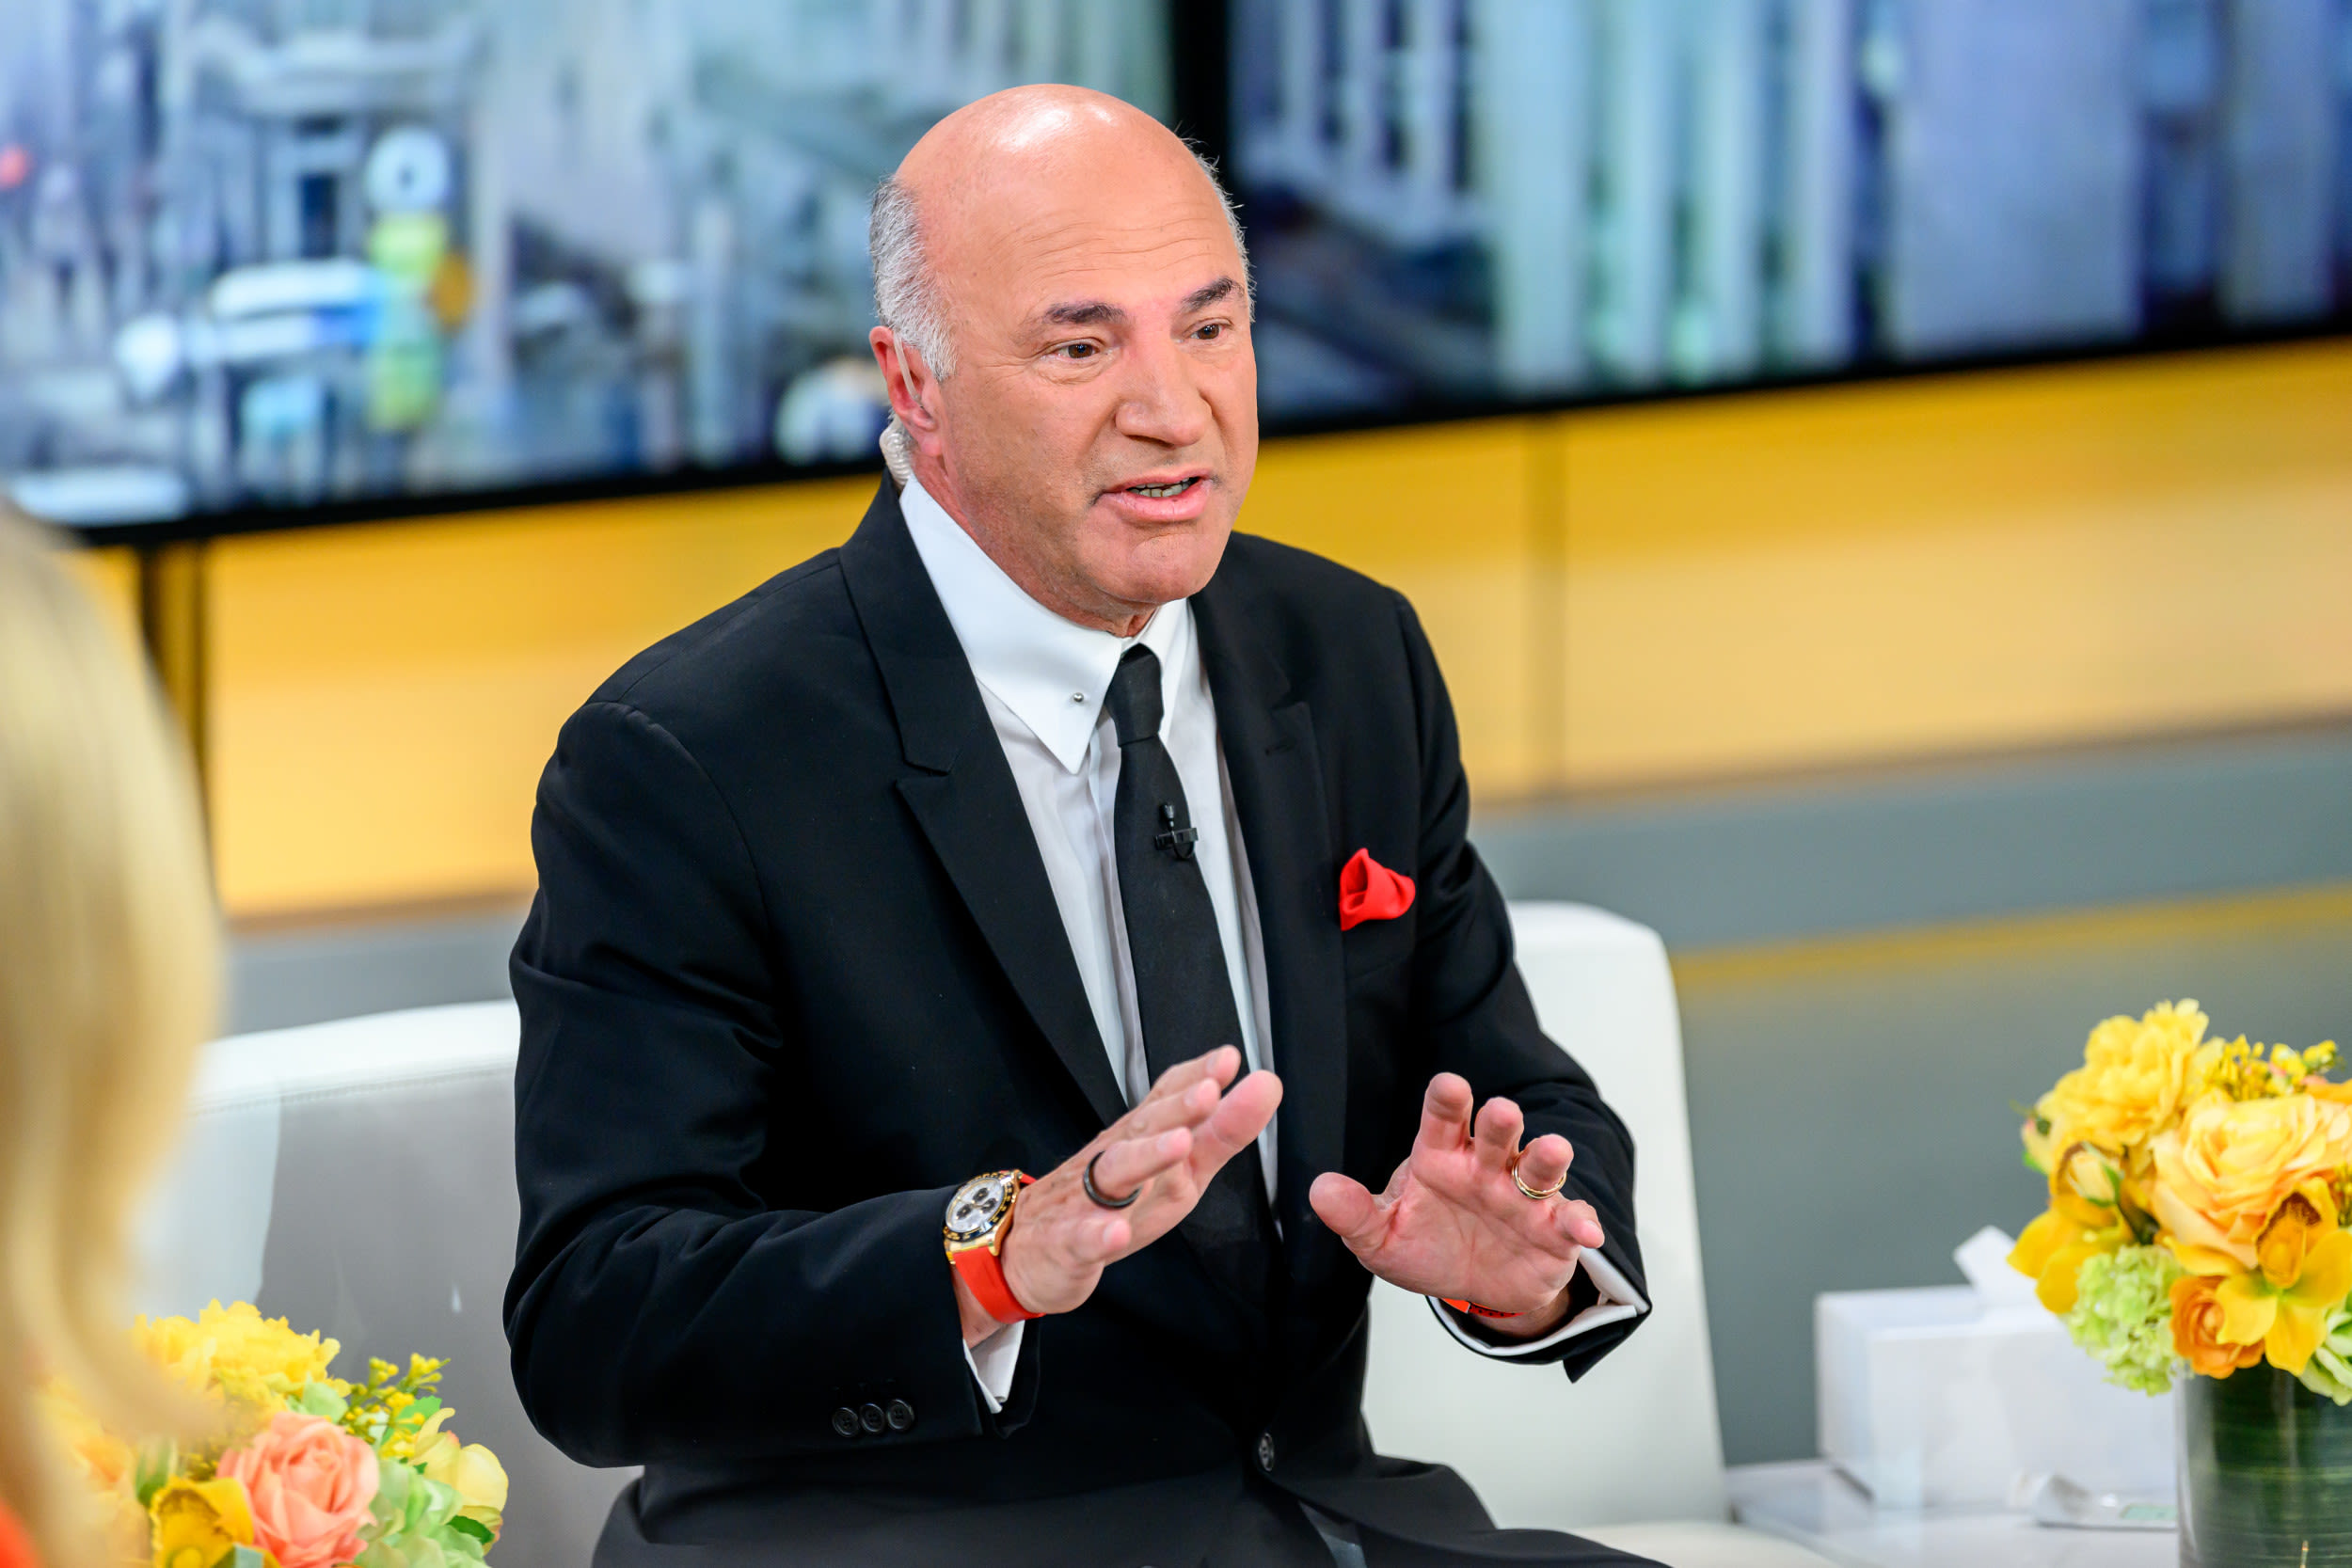 "Shark Tank's" Kevin O'Leary warns student protesters are "screwed"